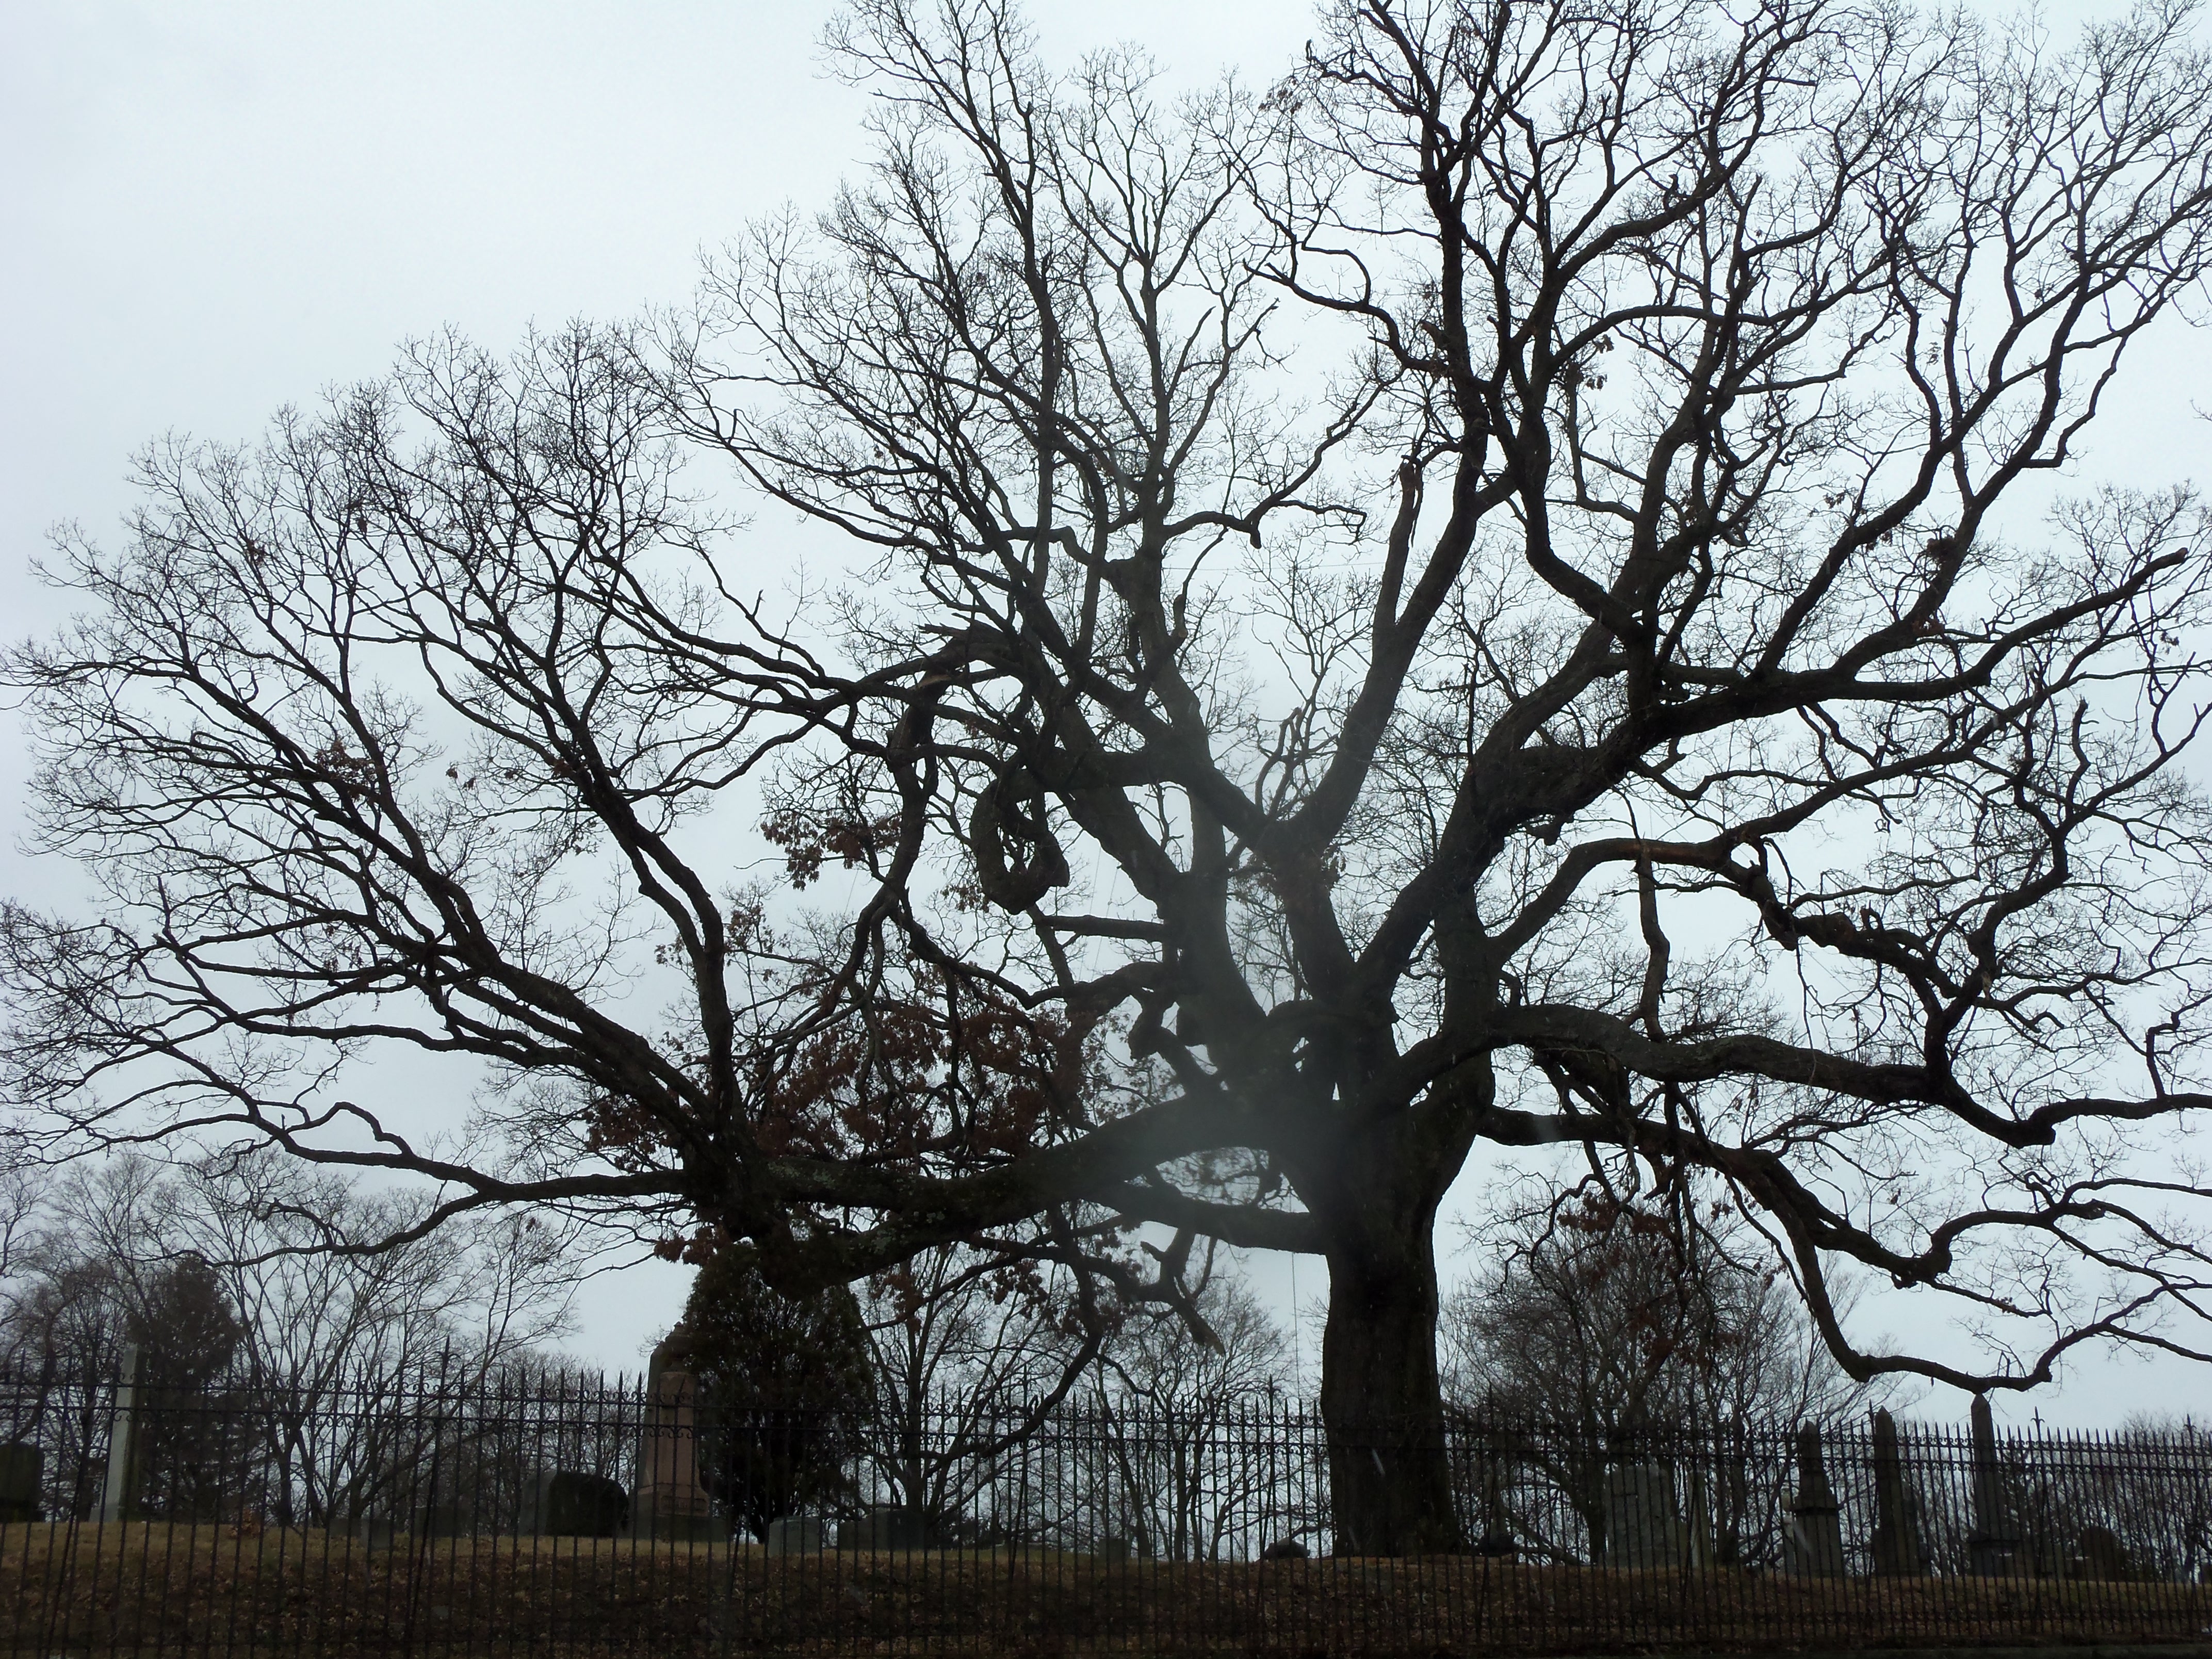 White Oak at Woodlawn, one of the Great Trees